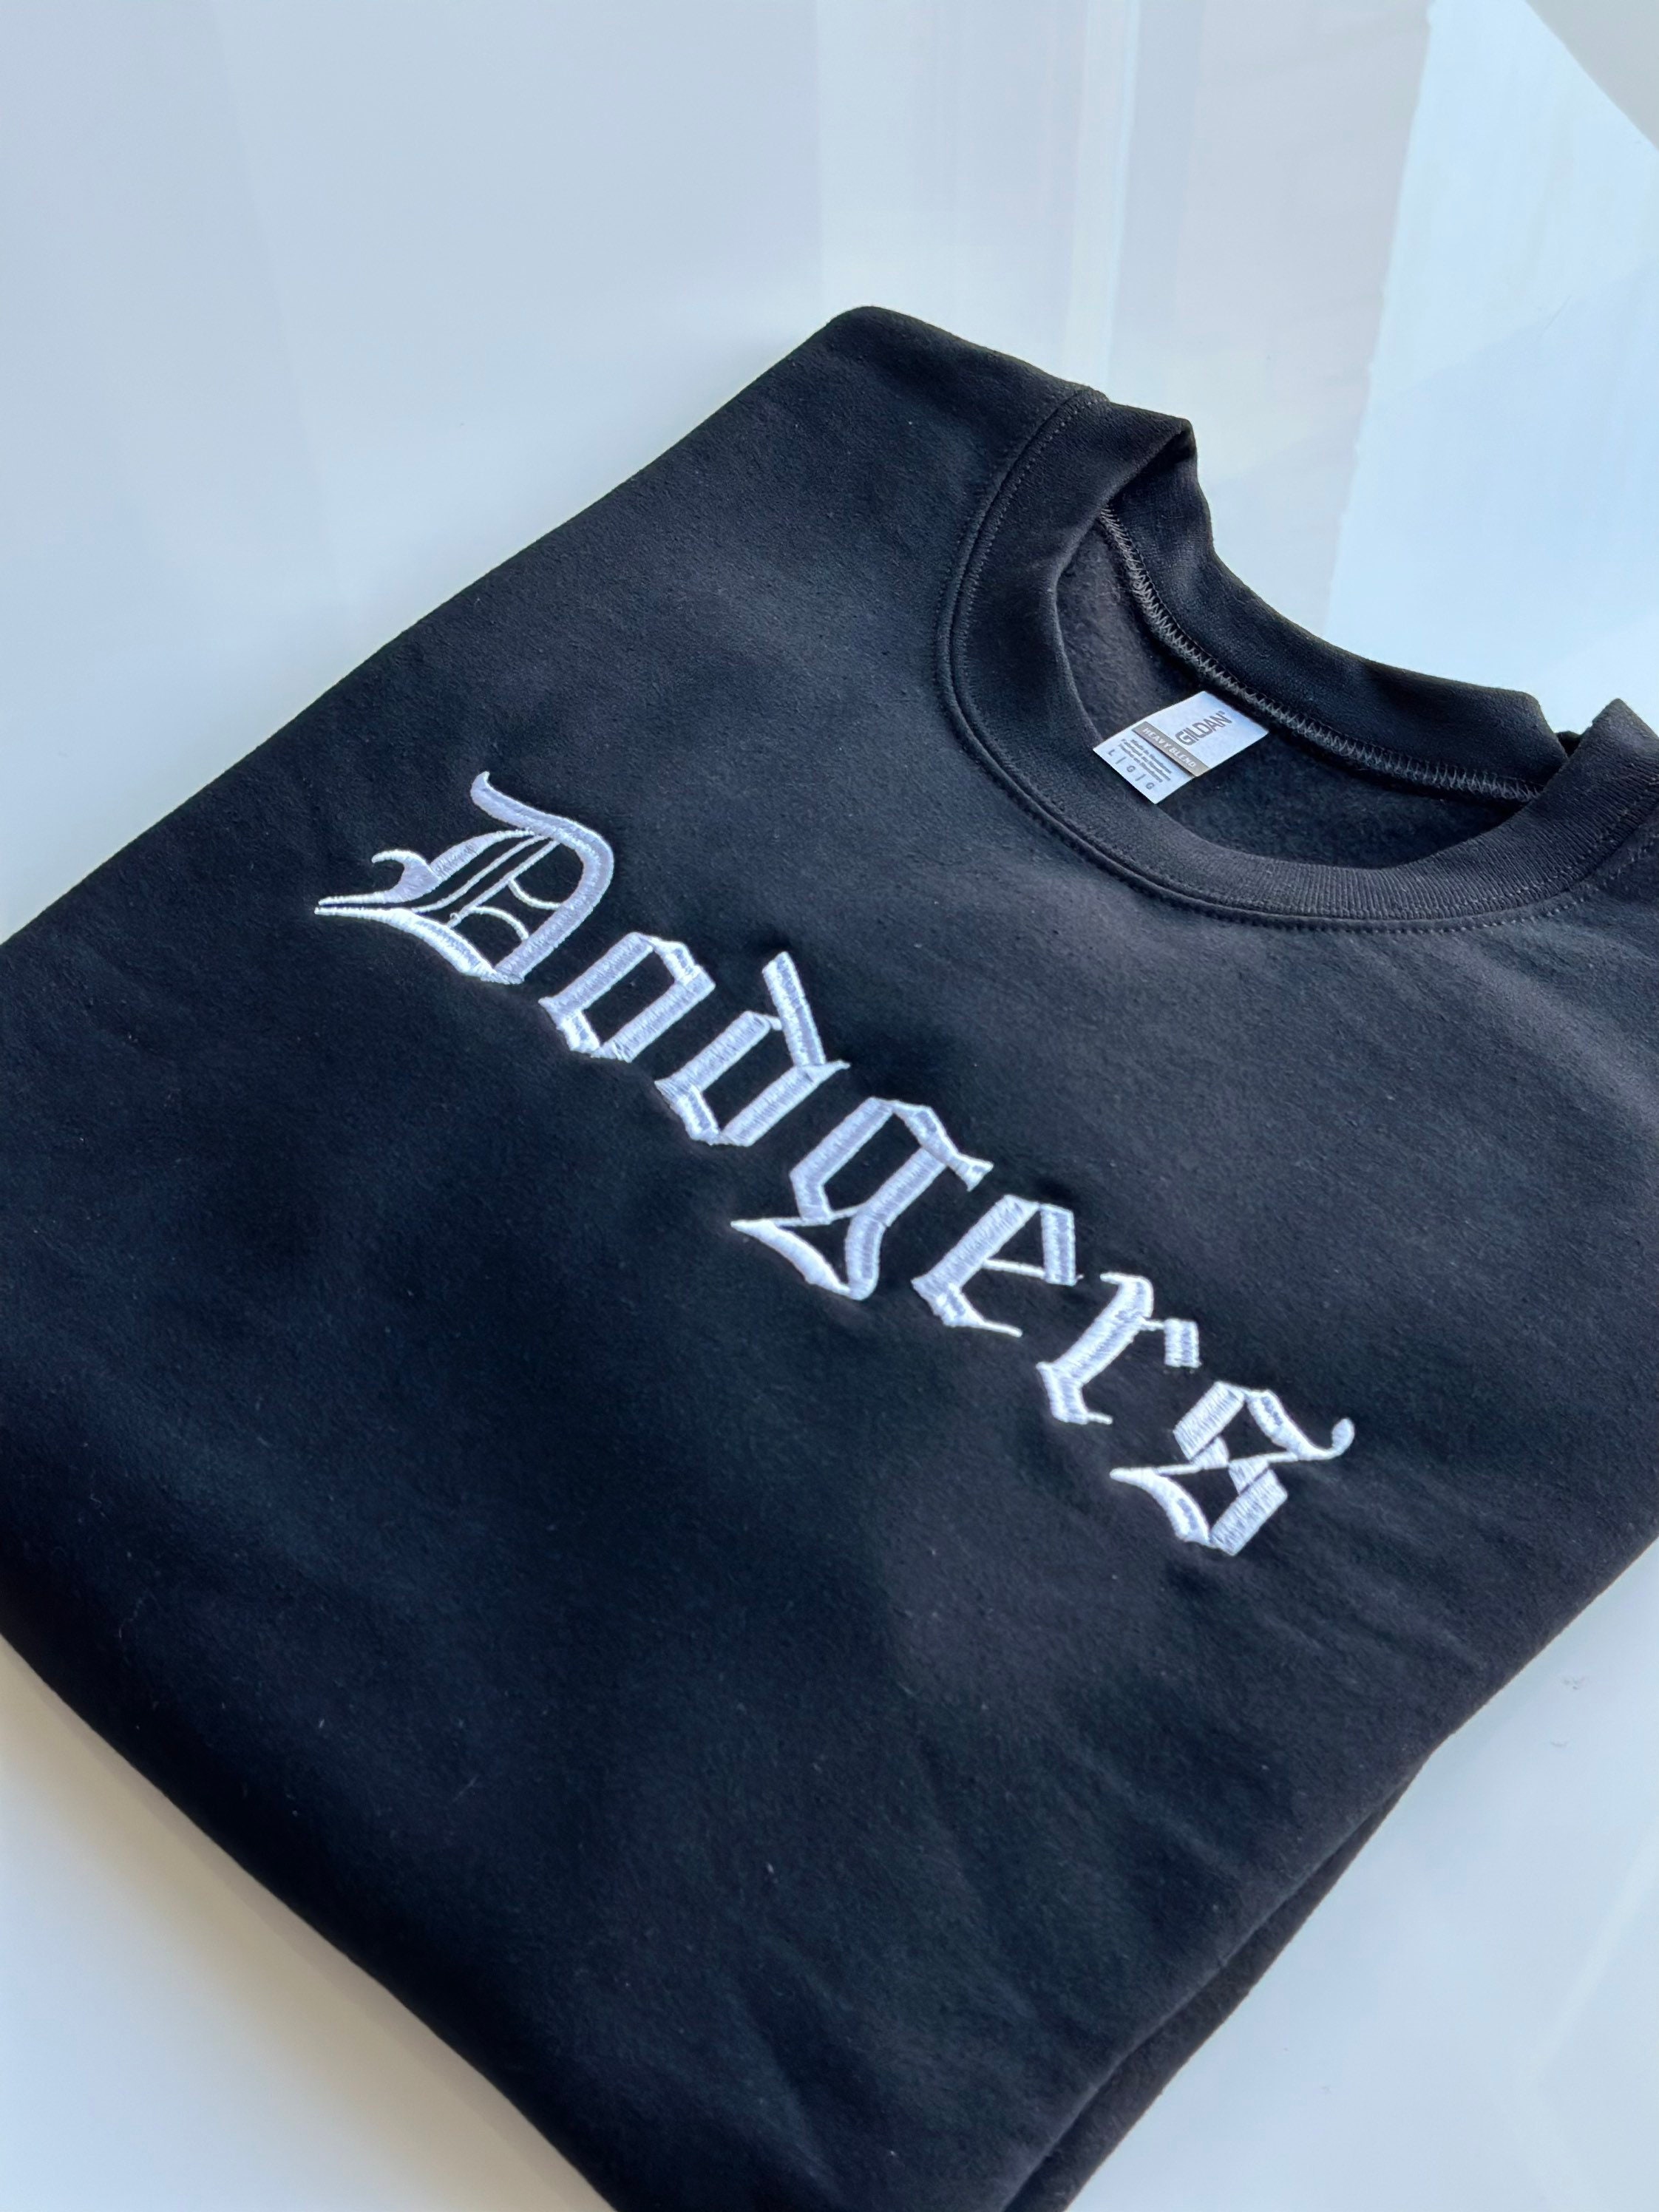 GlitterBabeBling Black Dodgers Embroidered Sweatshirt Crewneck | Los Angeles Embroidery Sweater